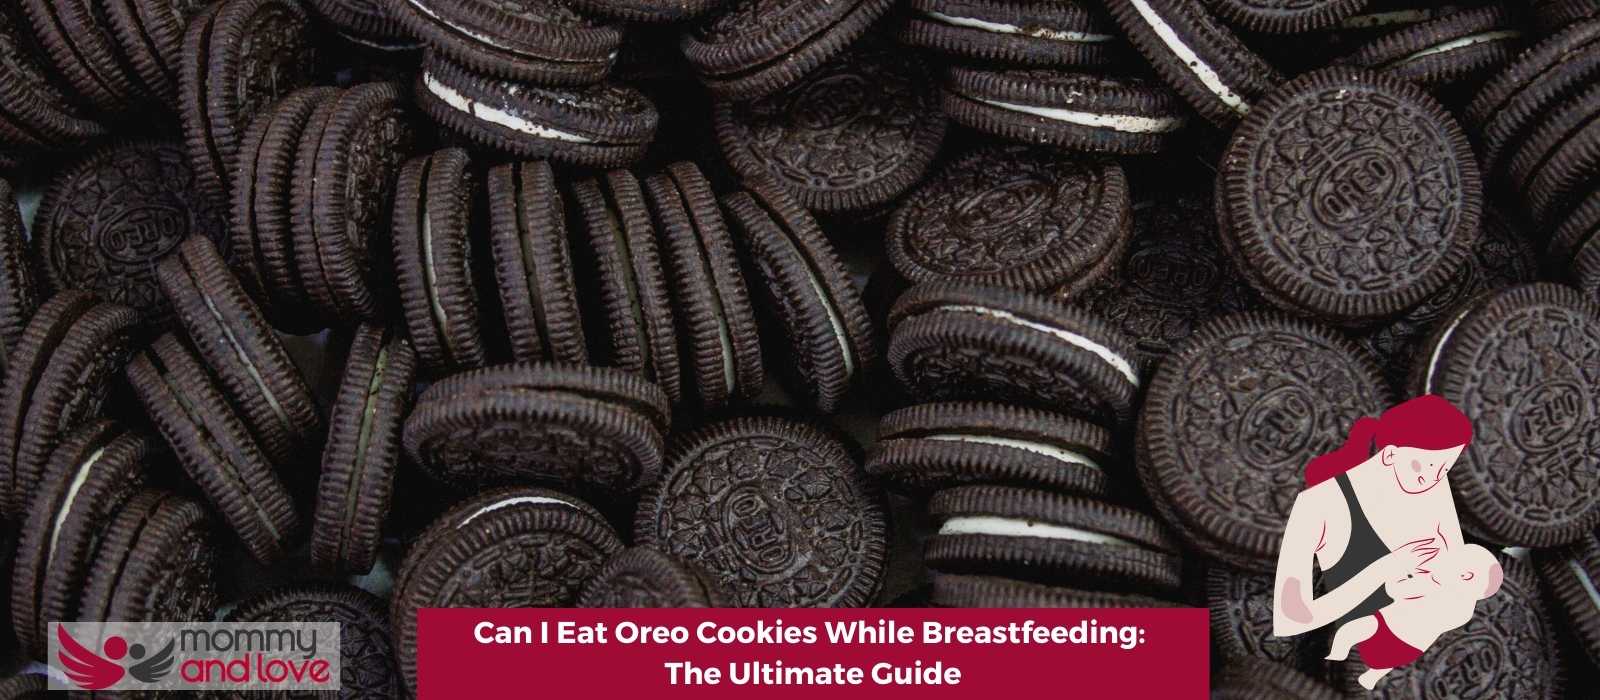 Can I Eat Oreo Cookies While Breastfeeding The Ultimate Guide